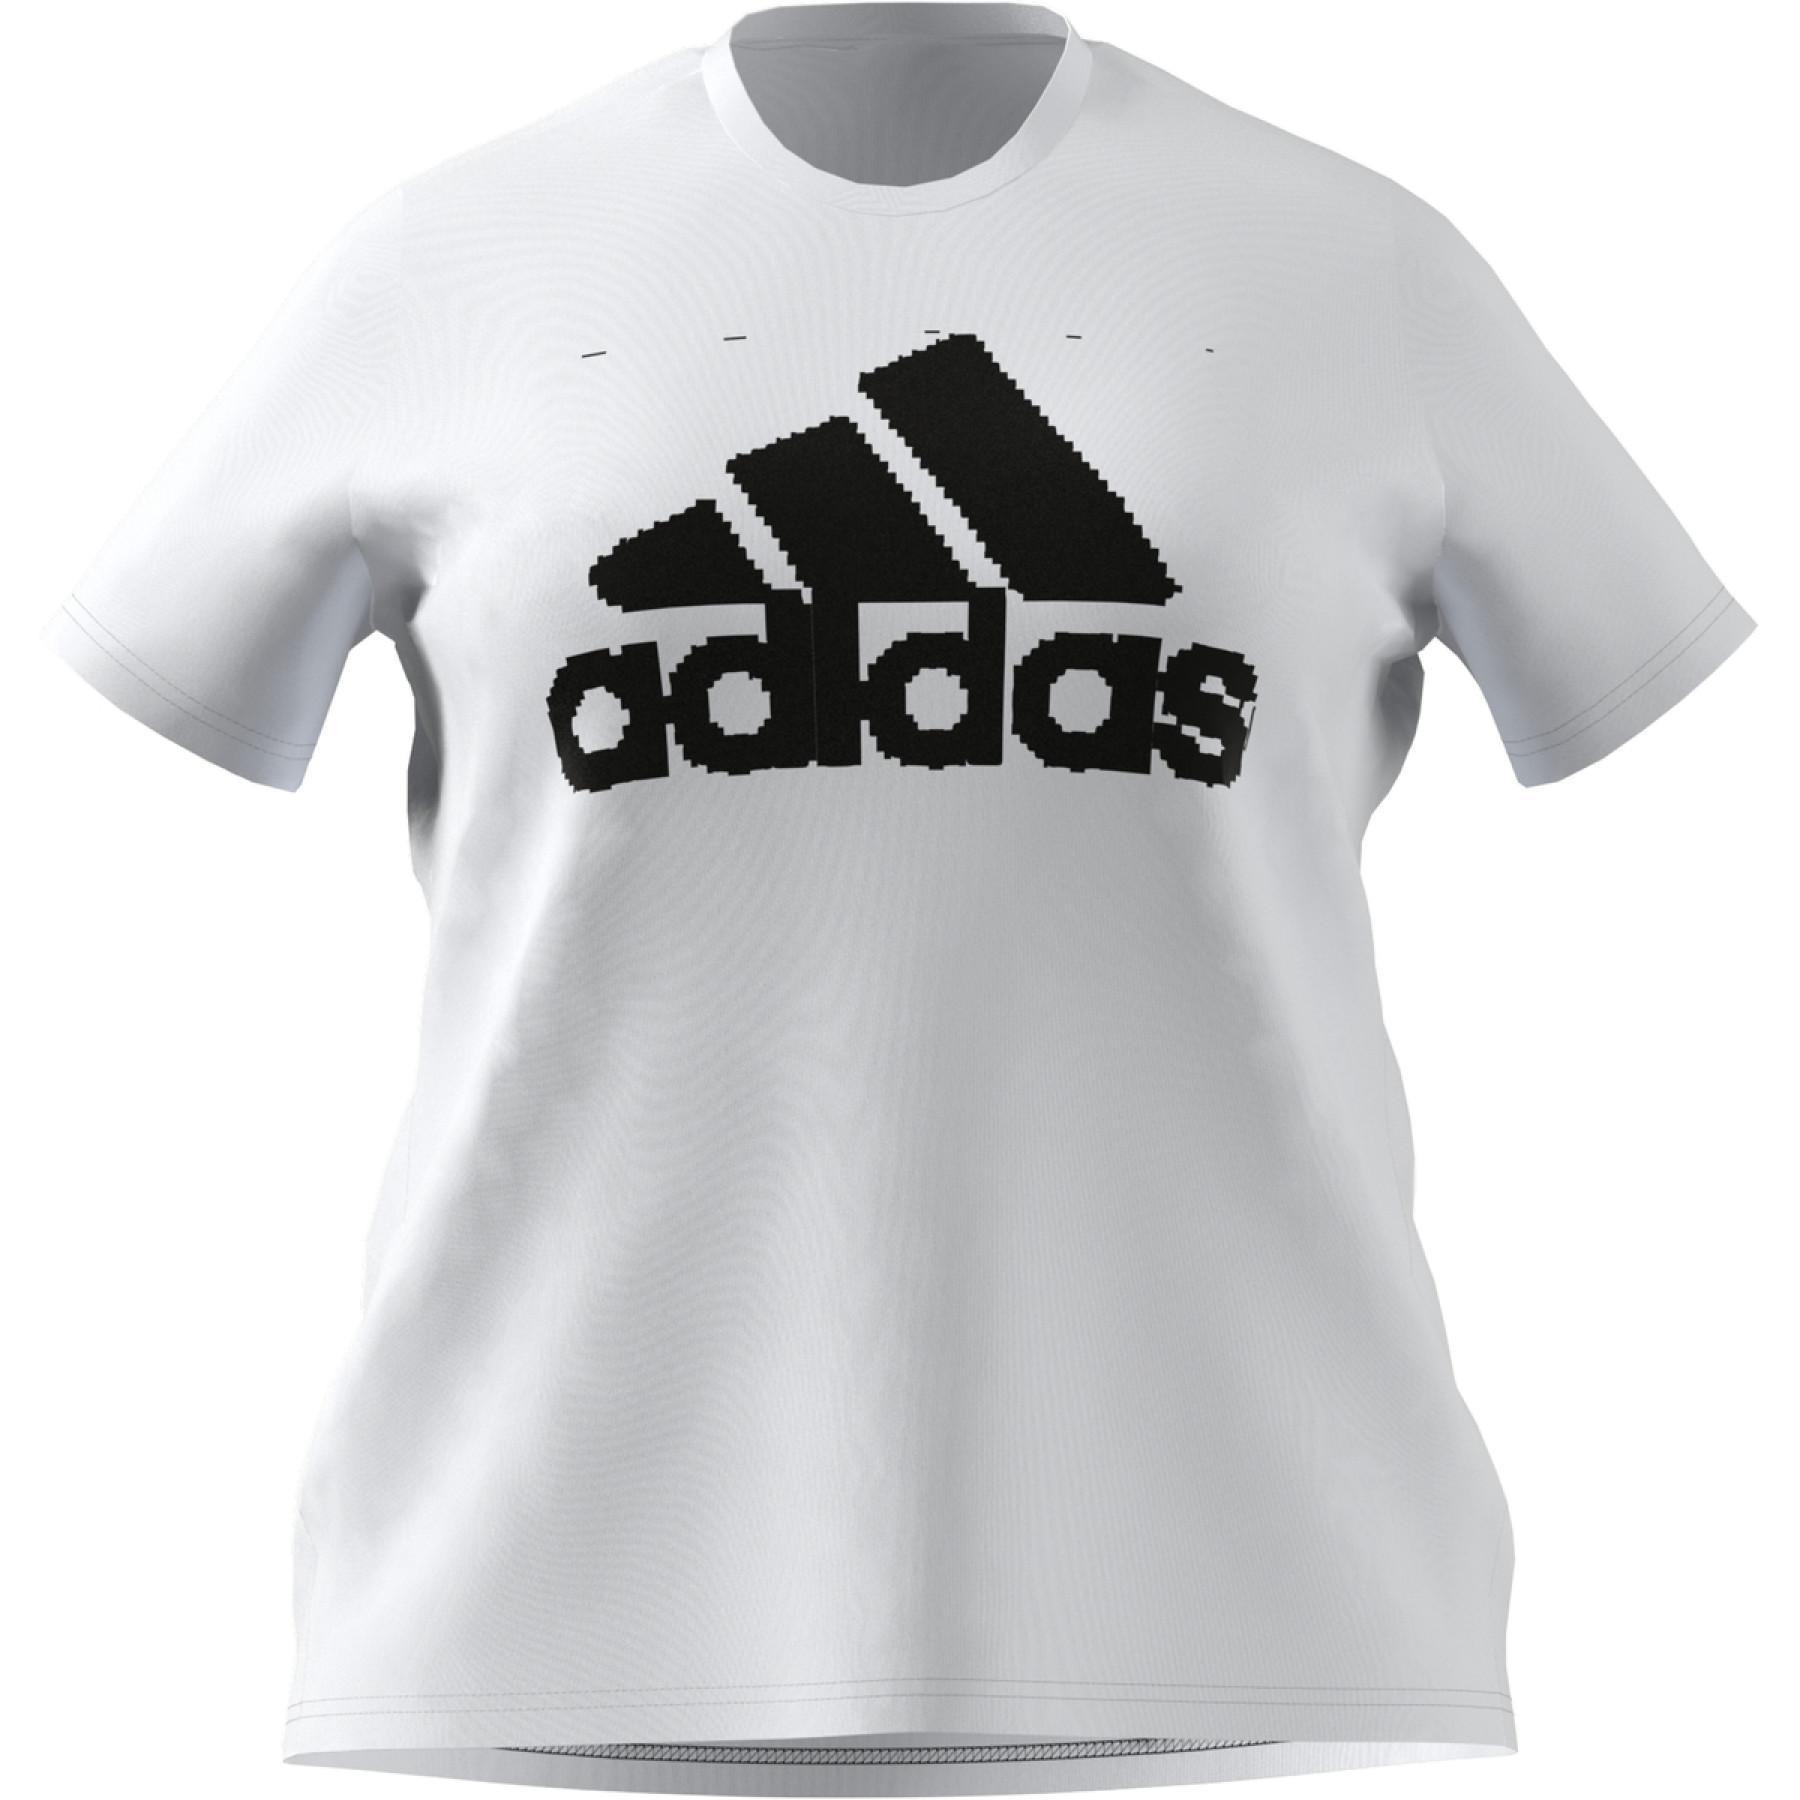 Camiseta de mujer adidas Must Haves Badge of Sport Grande Taille